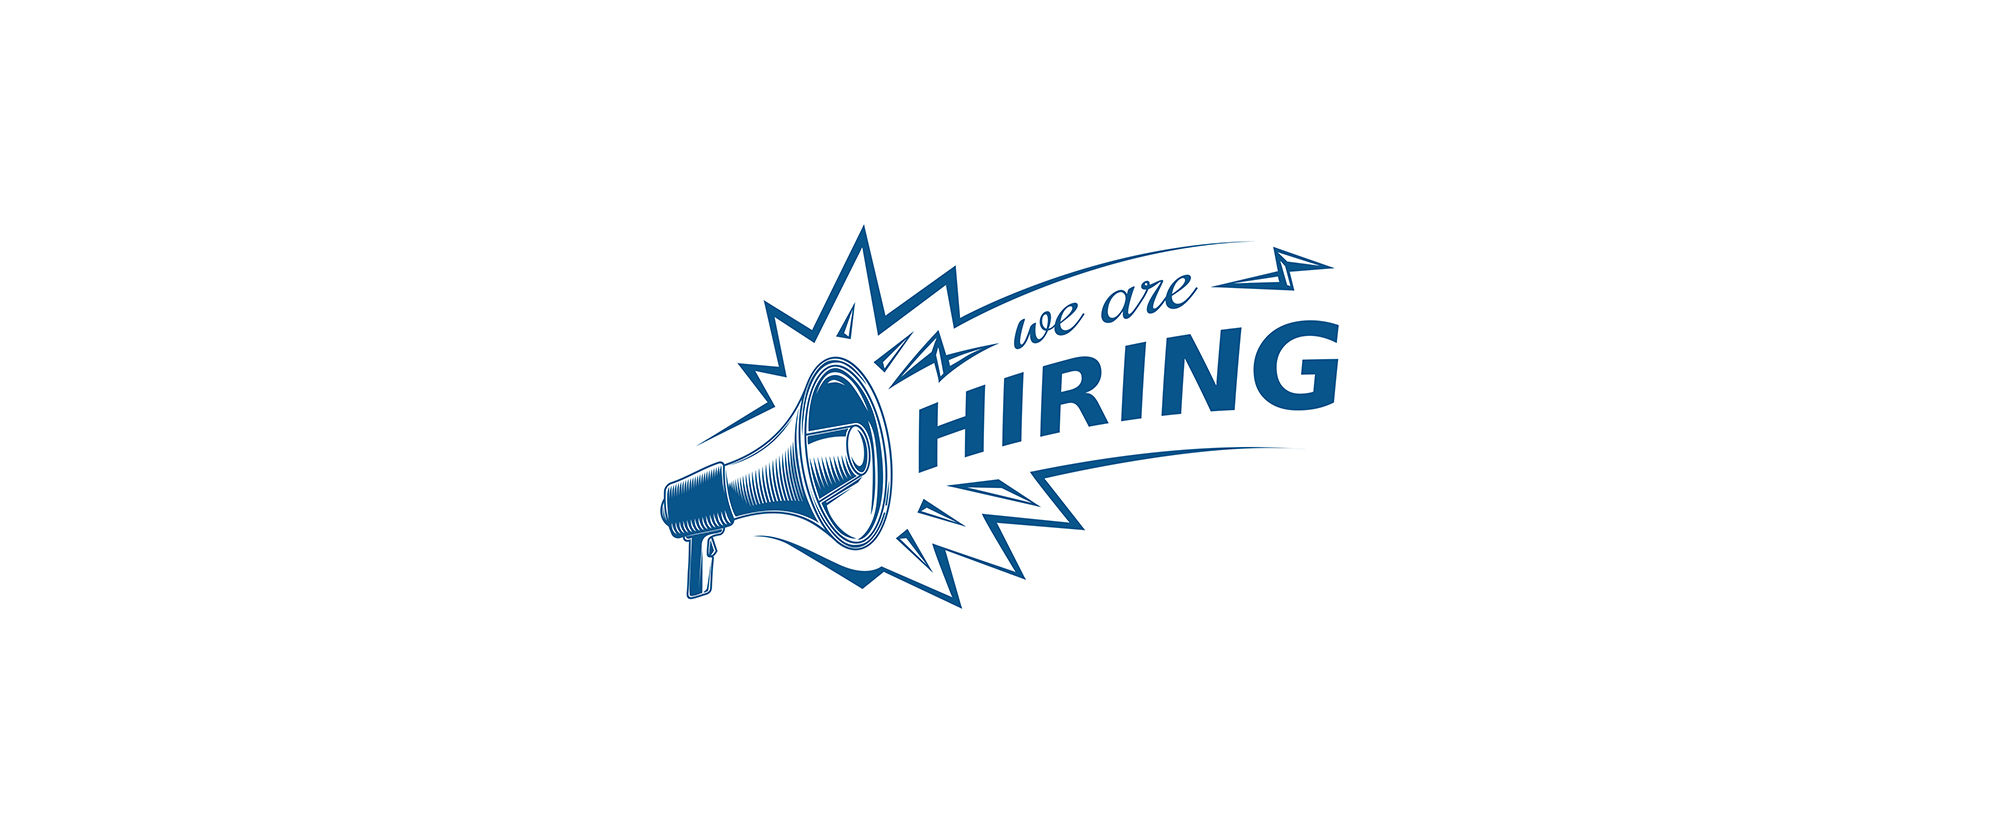 Graphic of We Are Hiring with megaphone